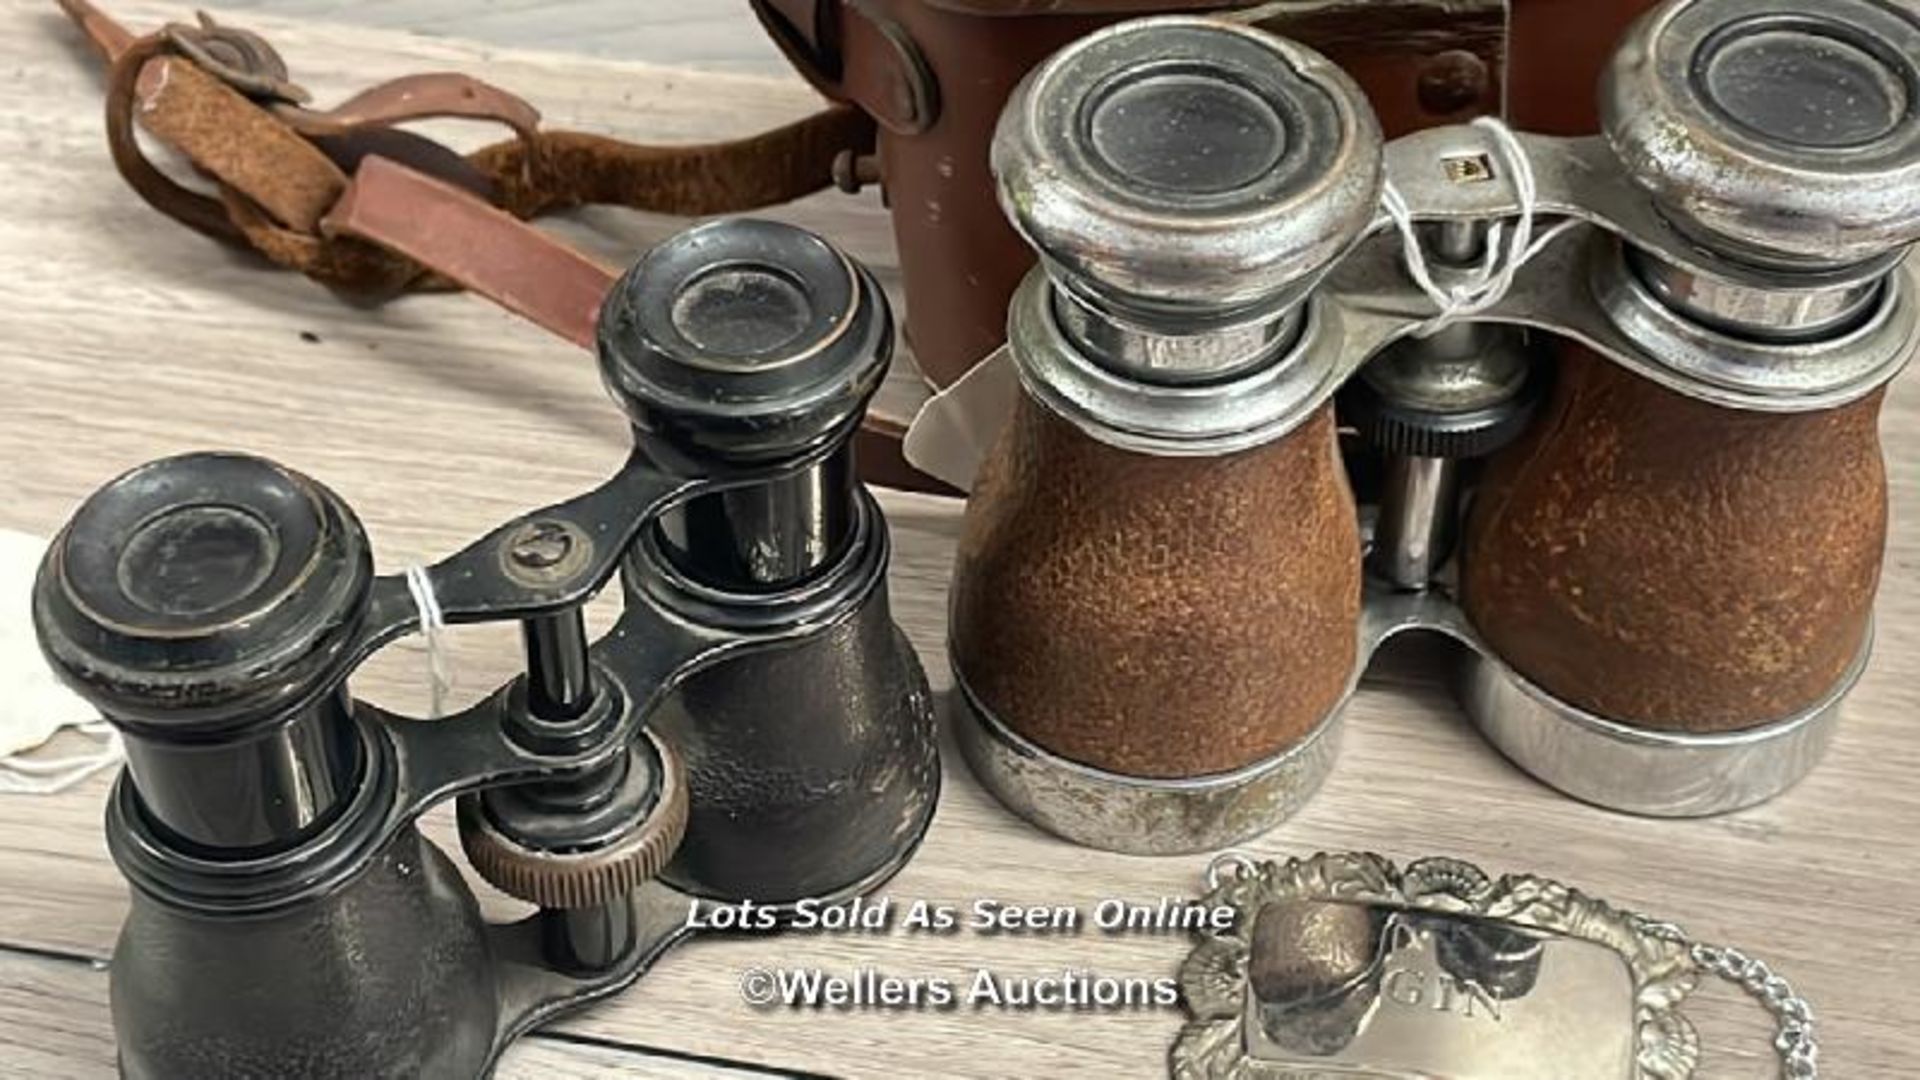 ASSORTED VINTAGE ITEMS INCLUDING TWO BINOCULARS, SCALE WEIGHTS AND METAL BOTTLE LABELS - Image 2 of 5